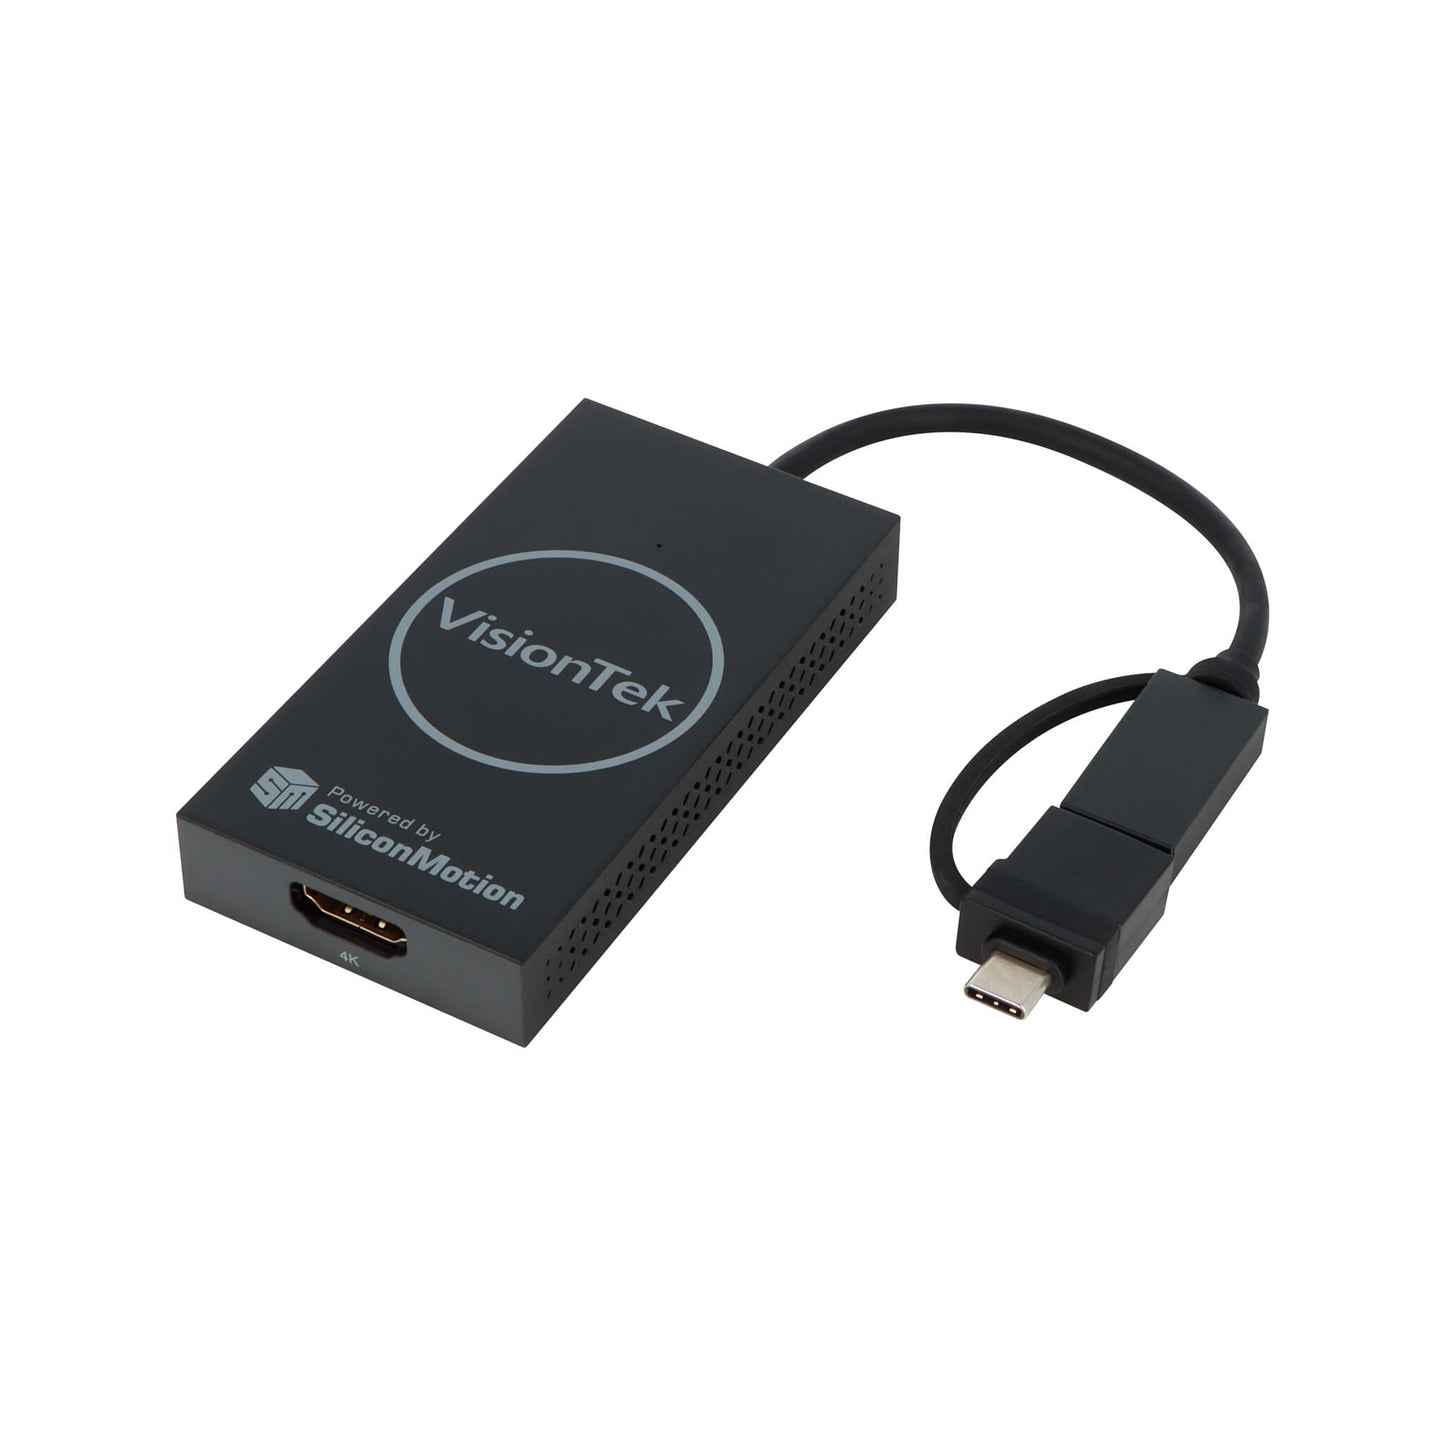 VT90 USB 3.0 to HDMI Adapter